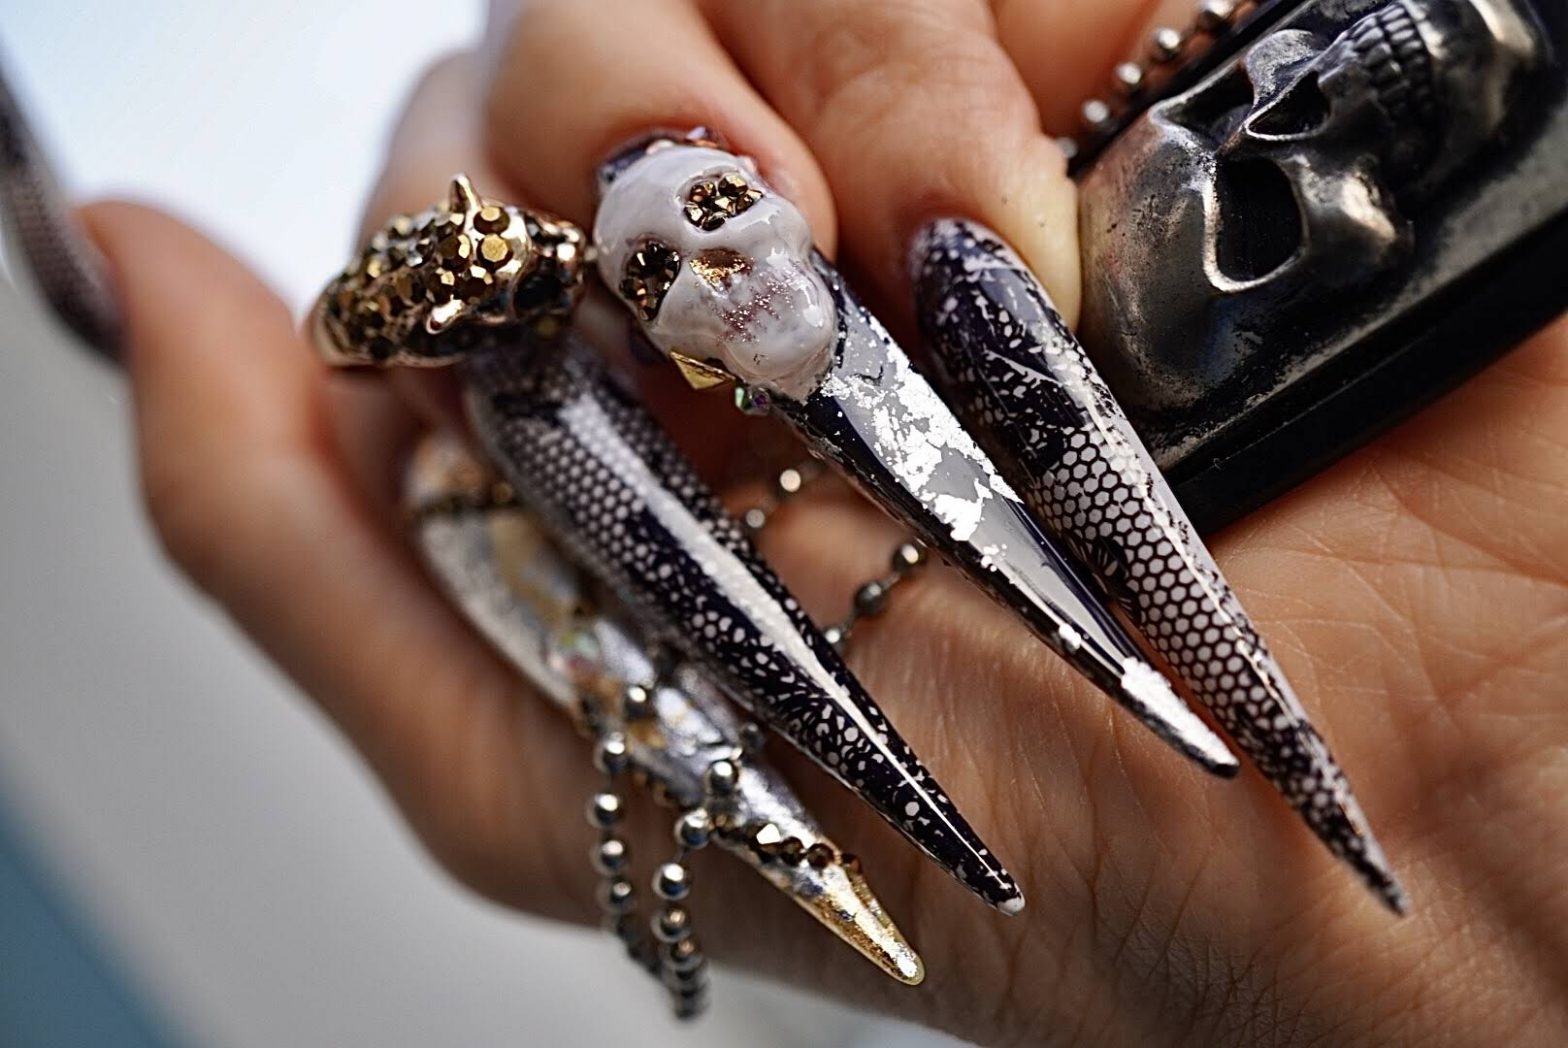 1. "10 Extreme Nail Art Videos That Will Blow Your Mind" - wide 2